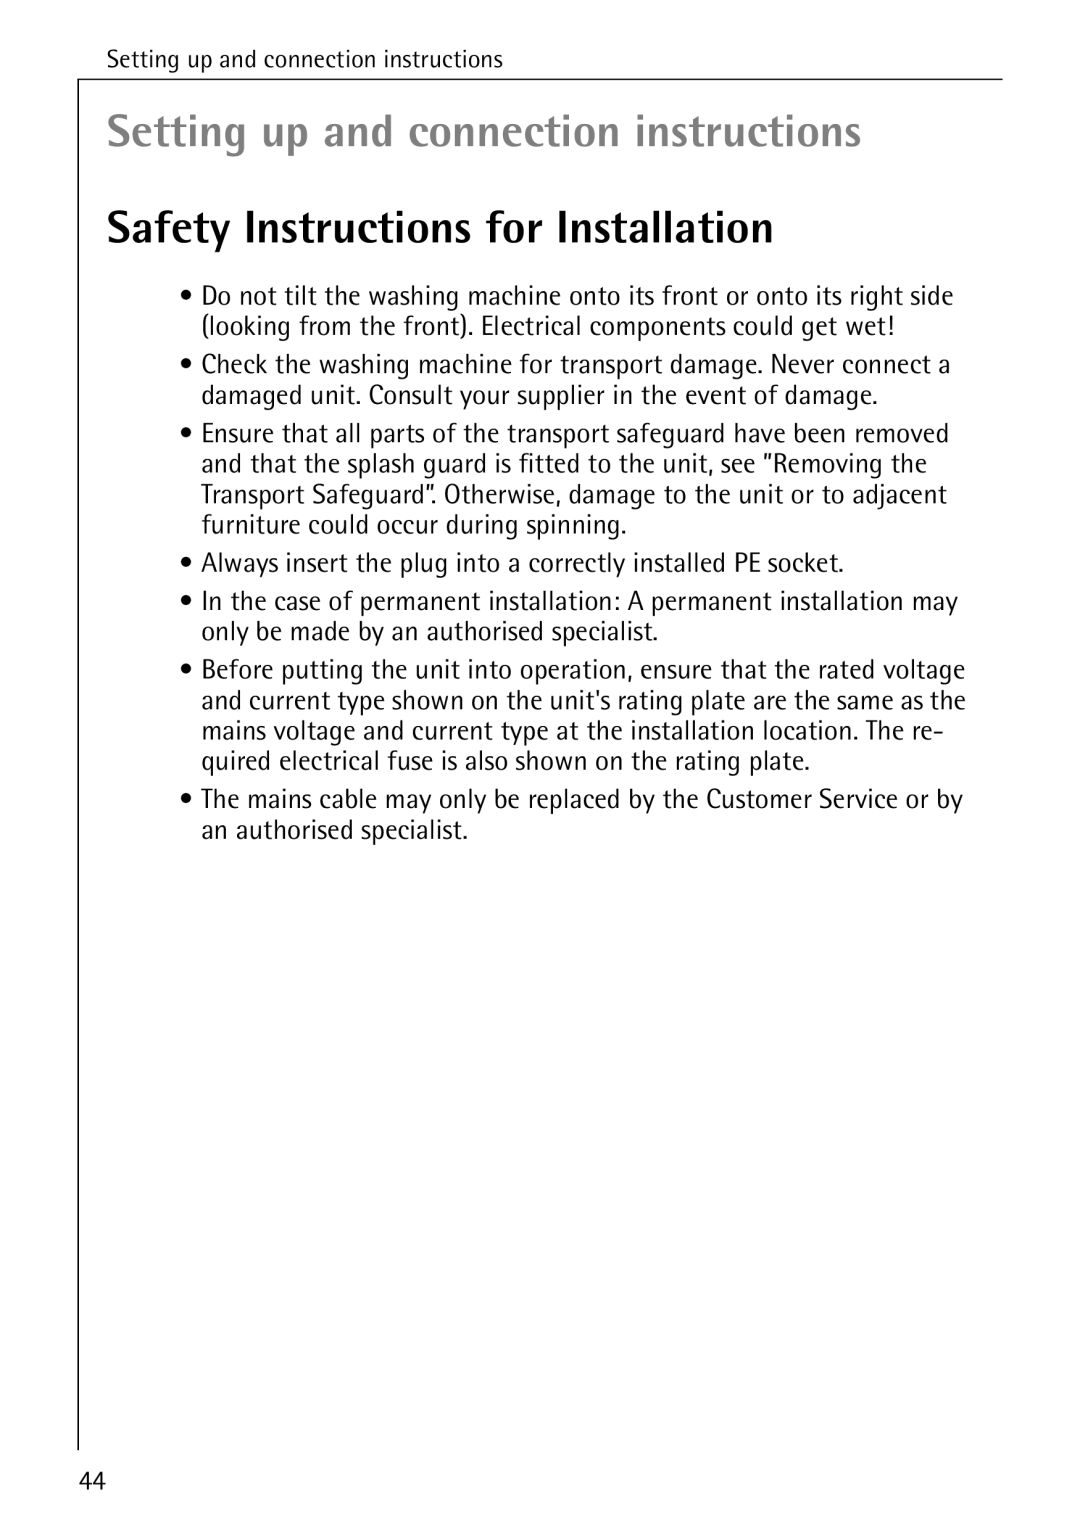 AEG 82730 manual Setting up and connection instructions, Safety Instructions for Installation 